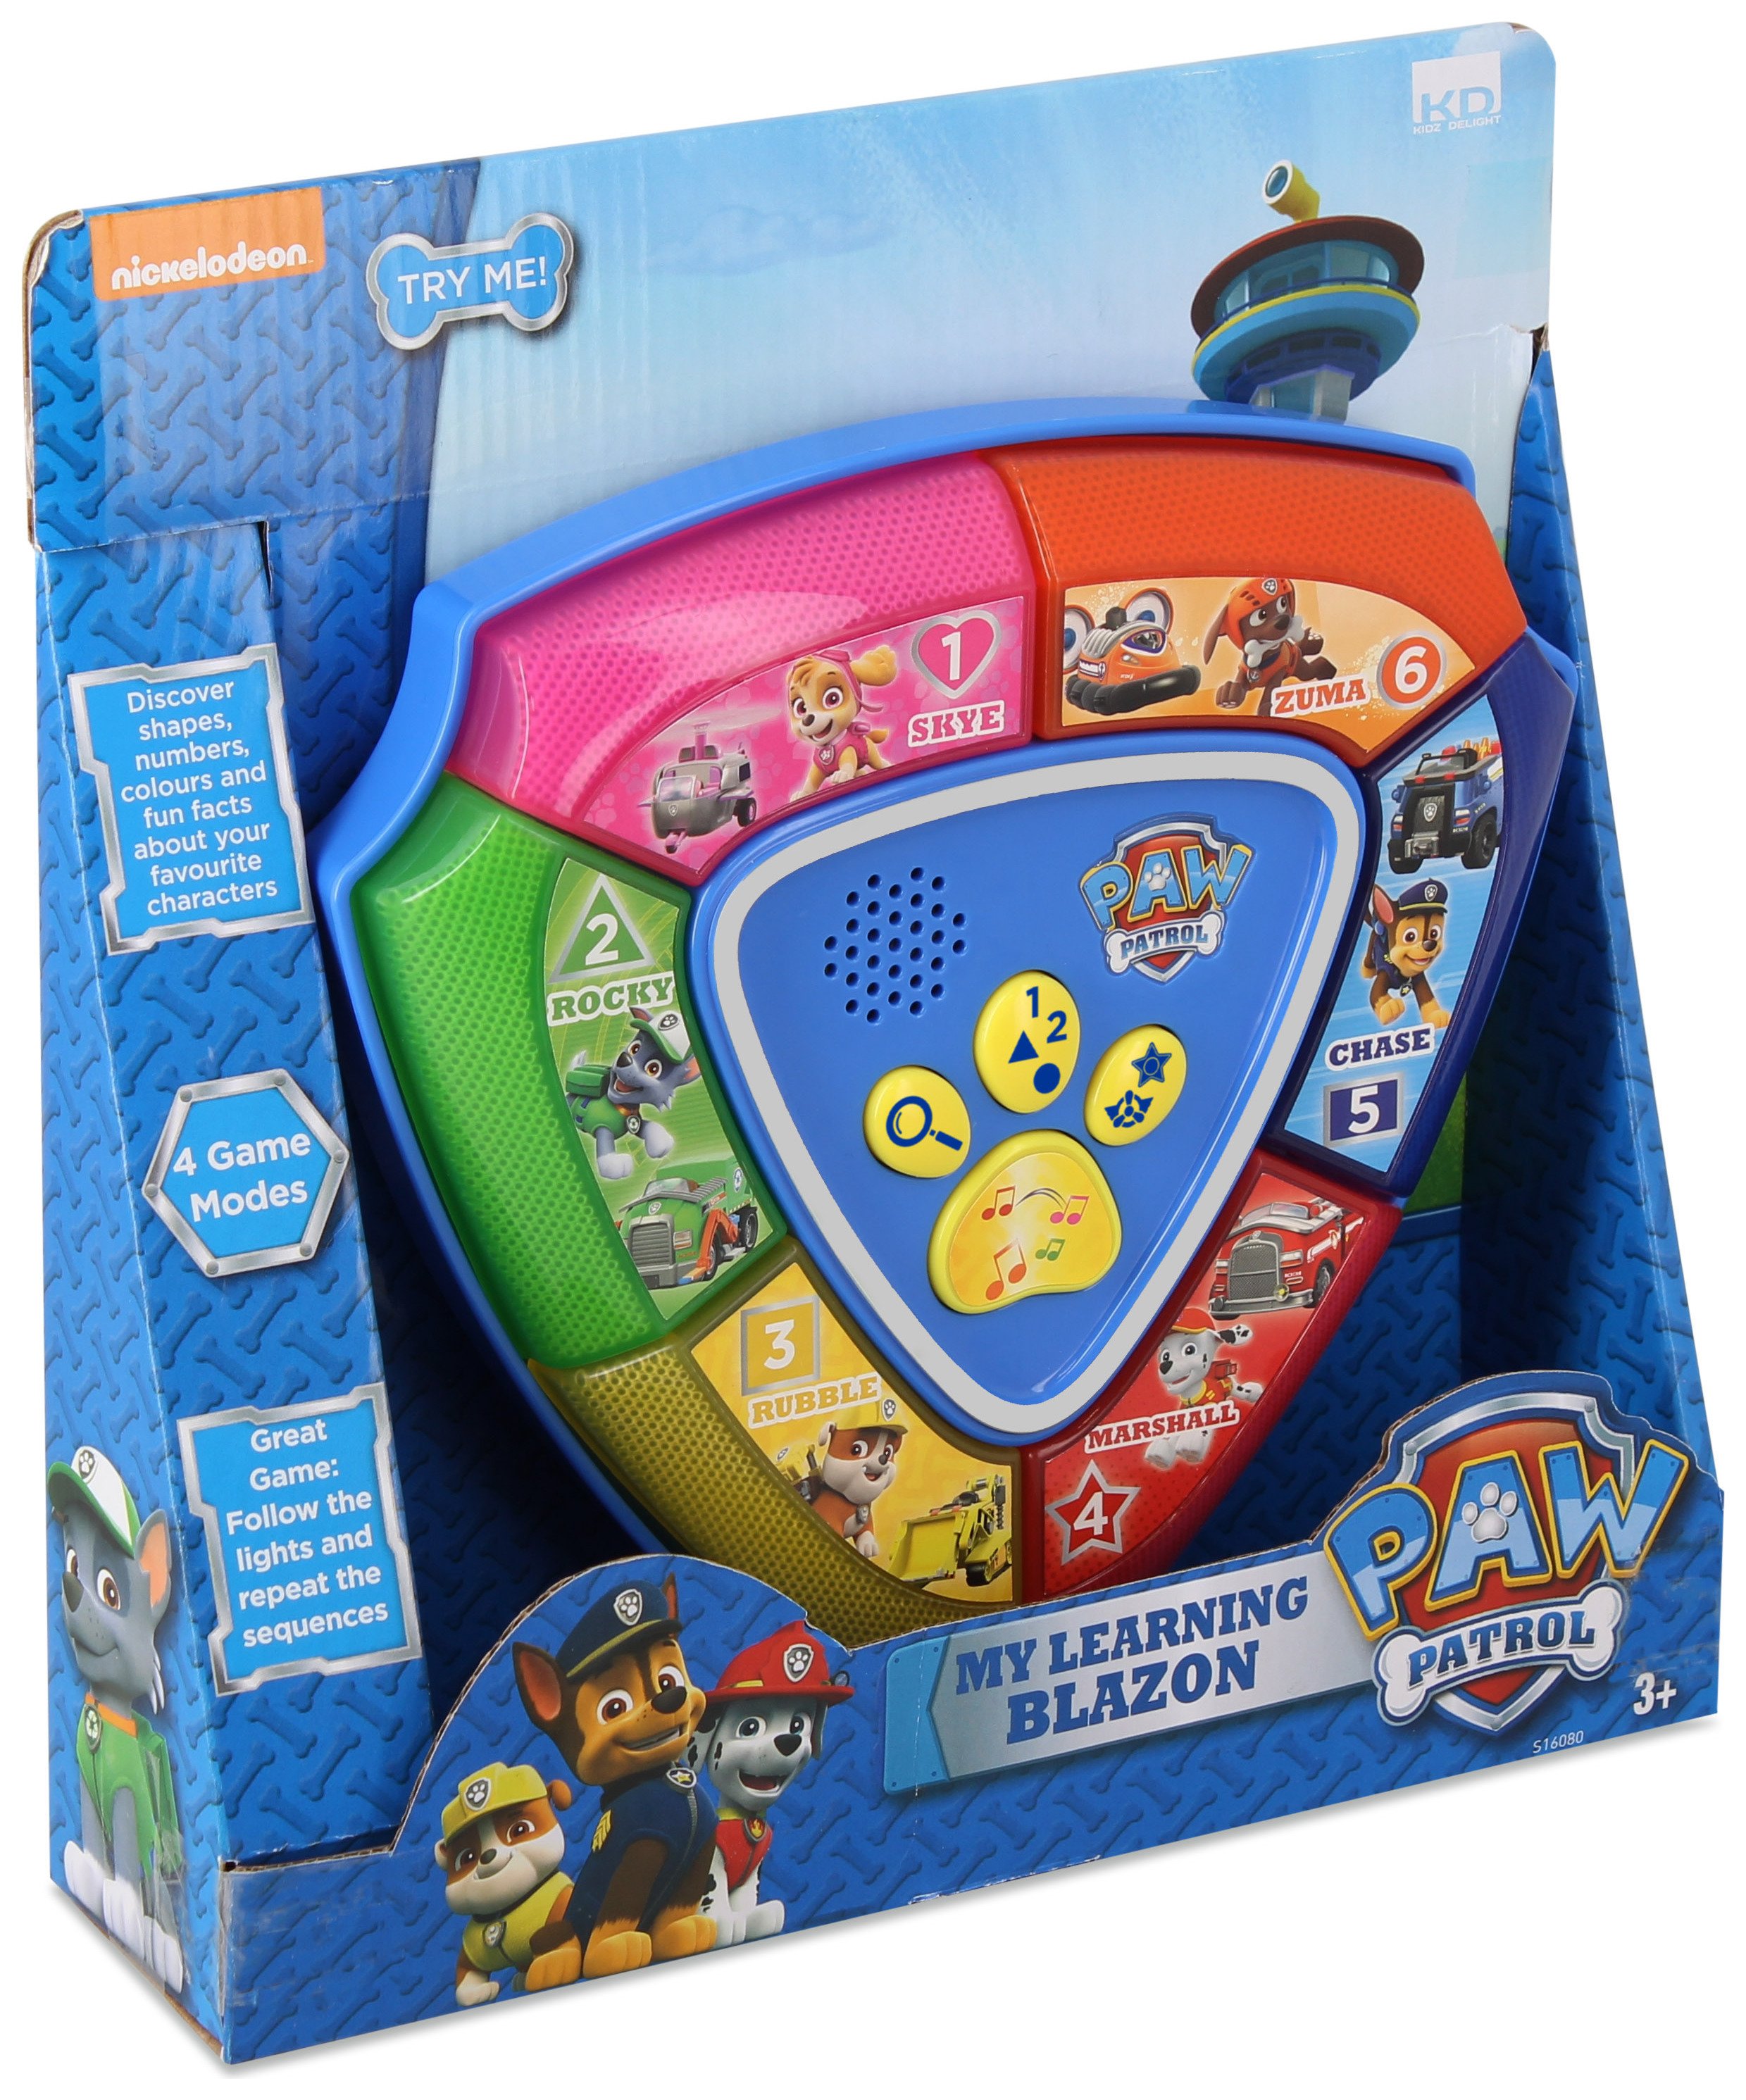 PAW Patrol Learning Blazon. Review